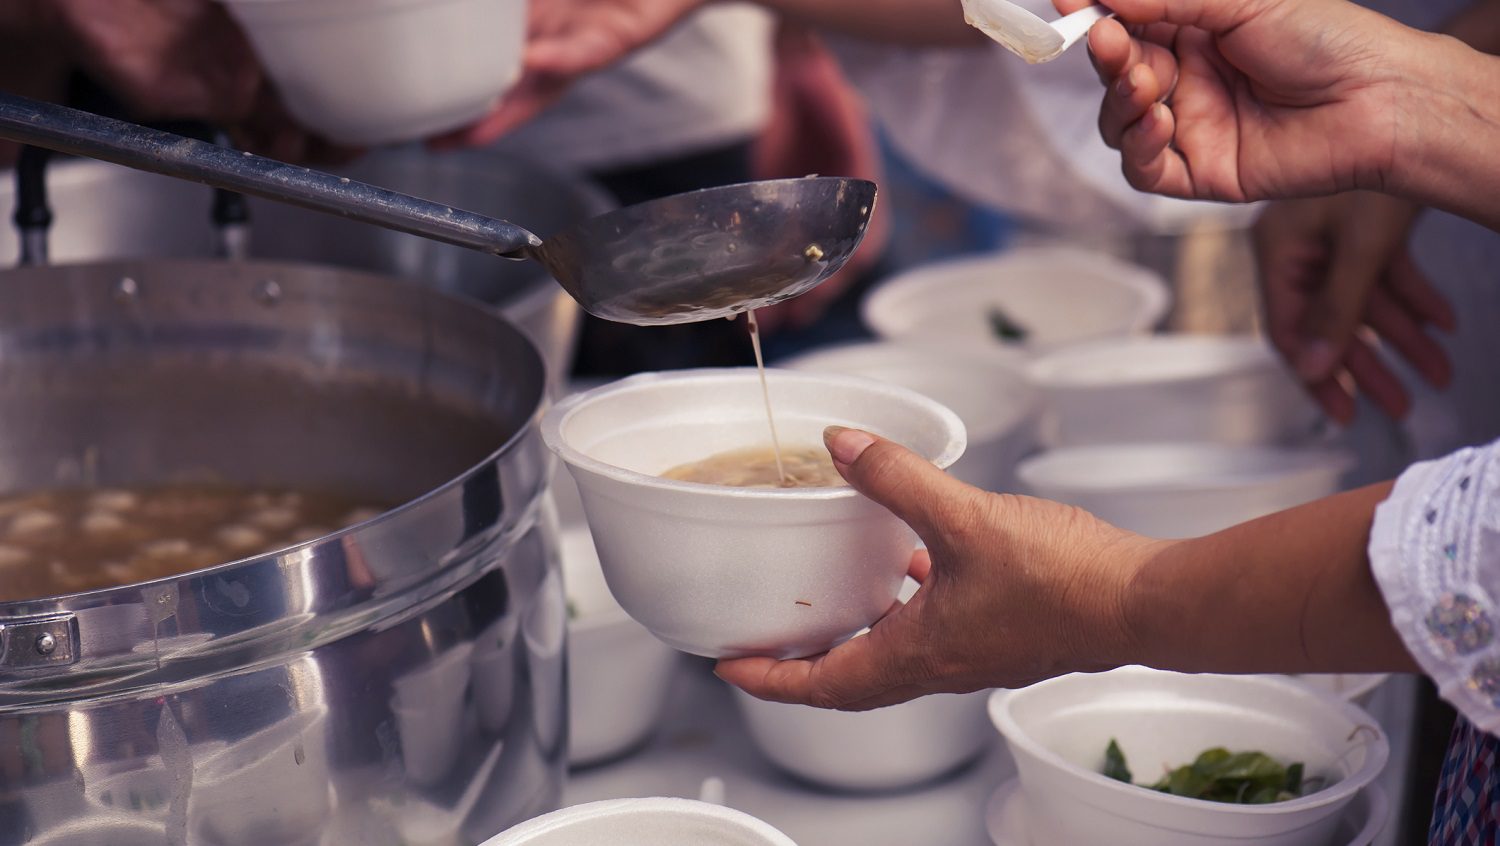 Hands passing out bowls of soup to the homeless: Photo 118467980 / Feeding Homeless © Todsaporn Bunmuen | Dreamstime.com